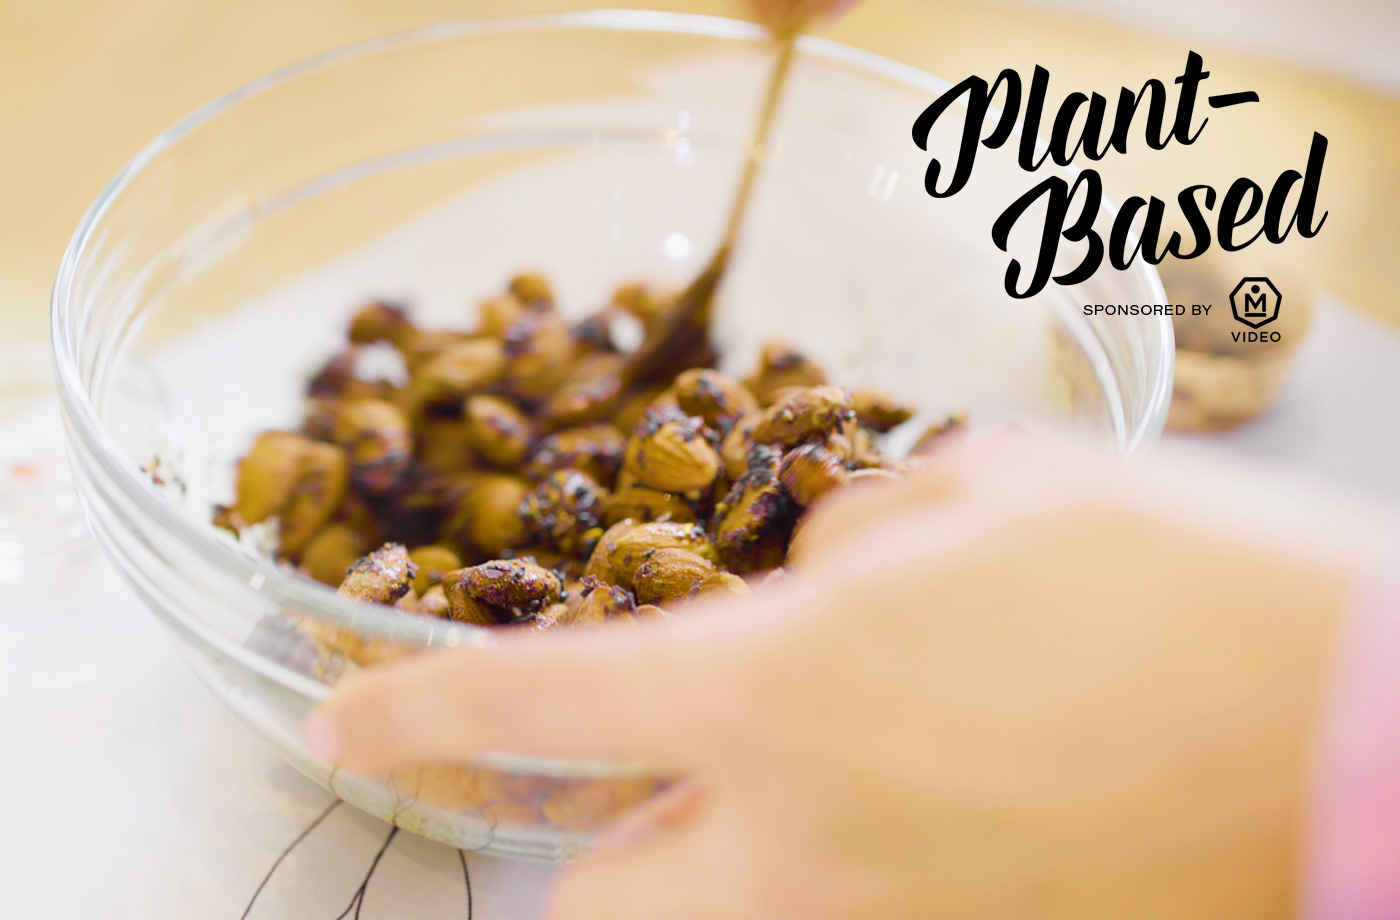 This high-protein, brain-boosting trail mix is going to be your new favorite snack